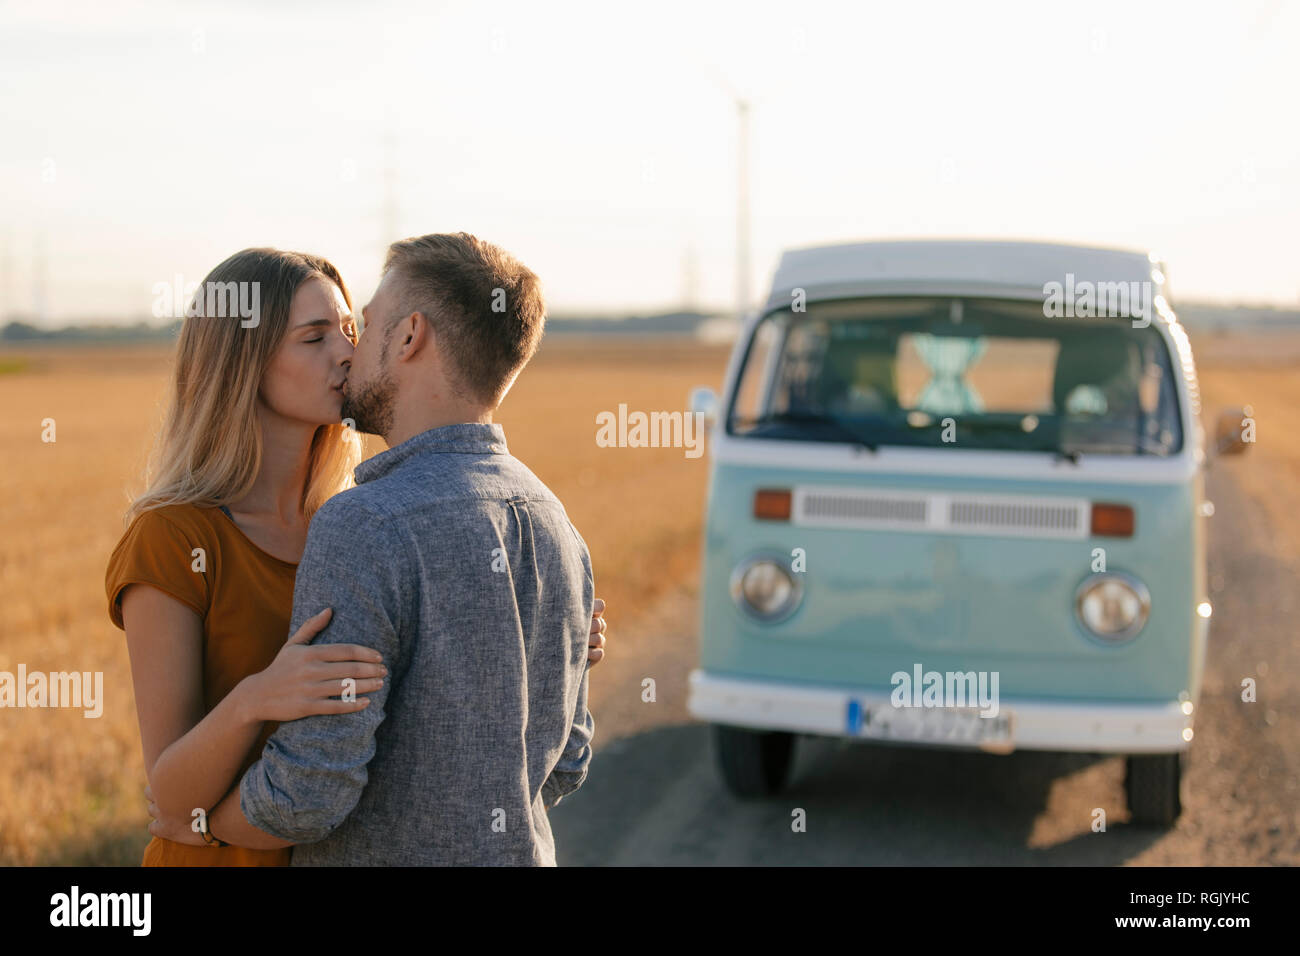 Young couple kissing at camper van in rural landscape Stock Photo